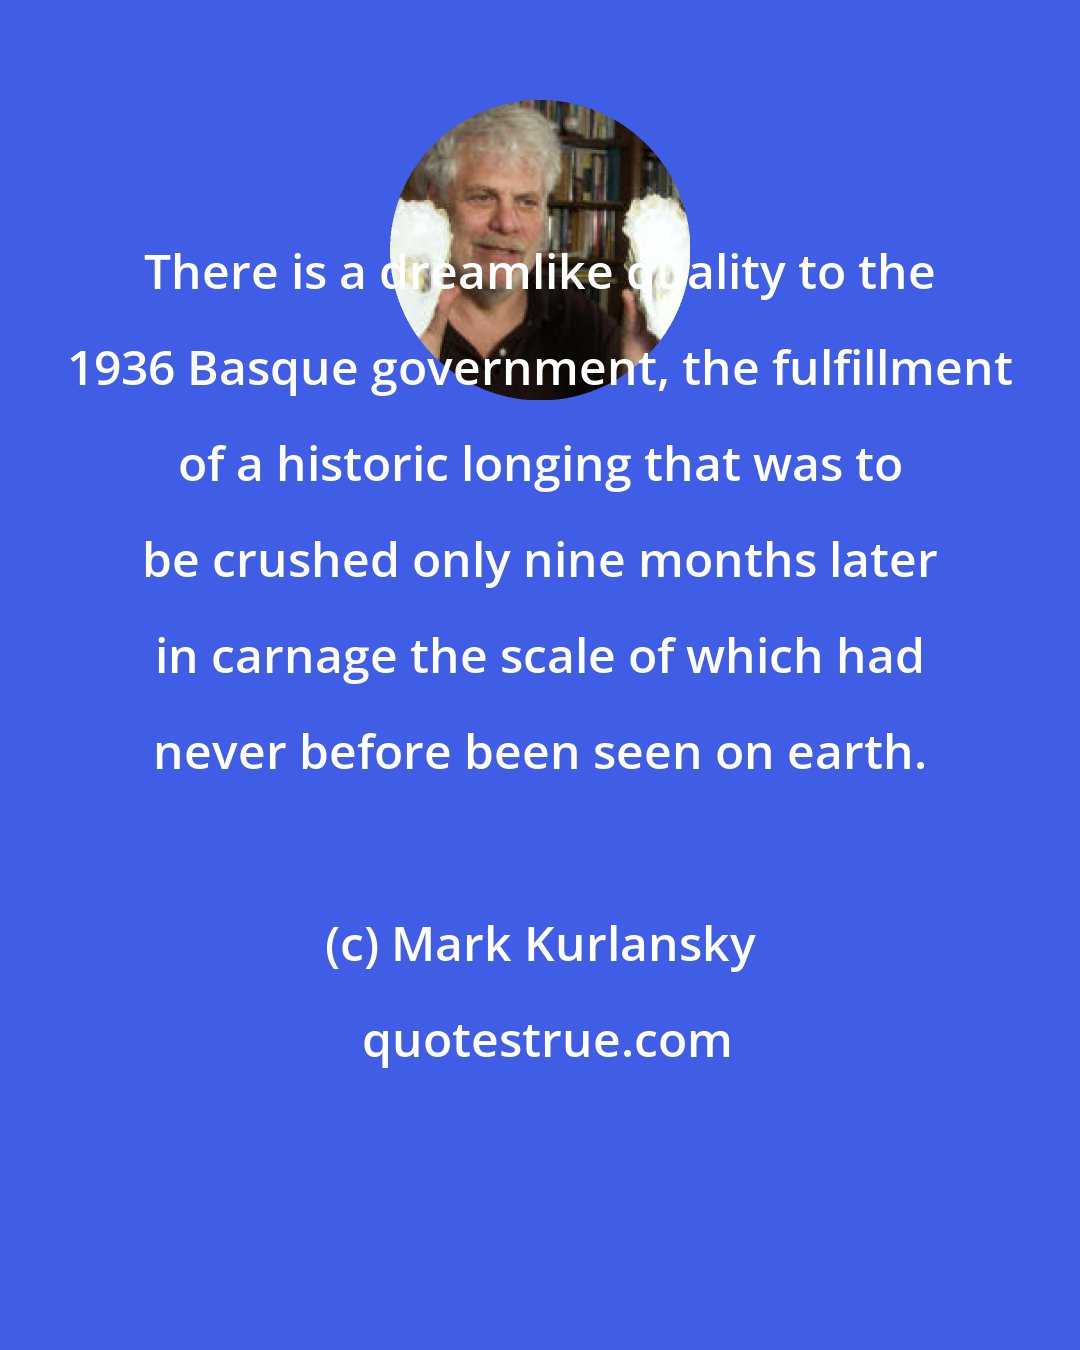 Mark Kurlansky: There is a dreamlike quality to the 1936 Basque government, the fulfillment of a historic longing that was to be crushed only nine months later in carnage the scale of which had never before been seen on earth.